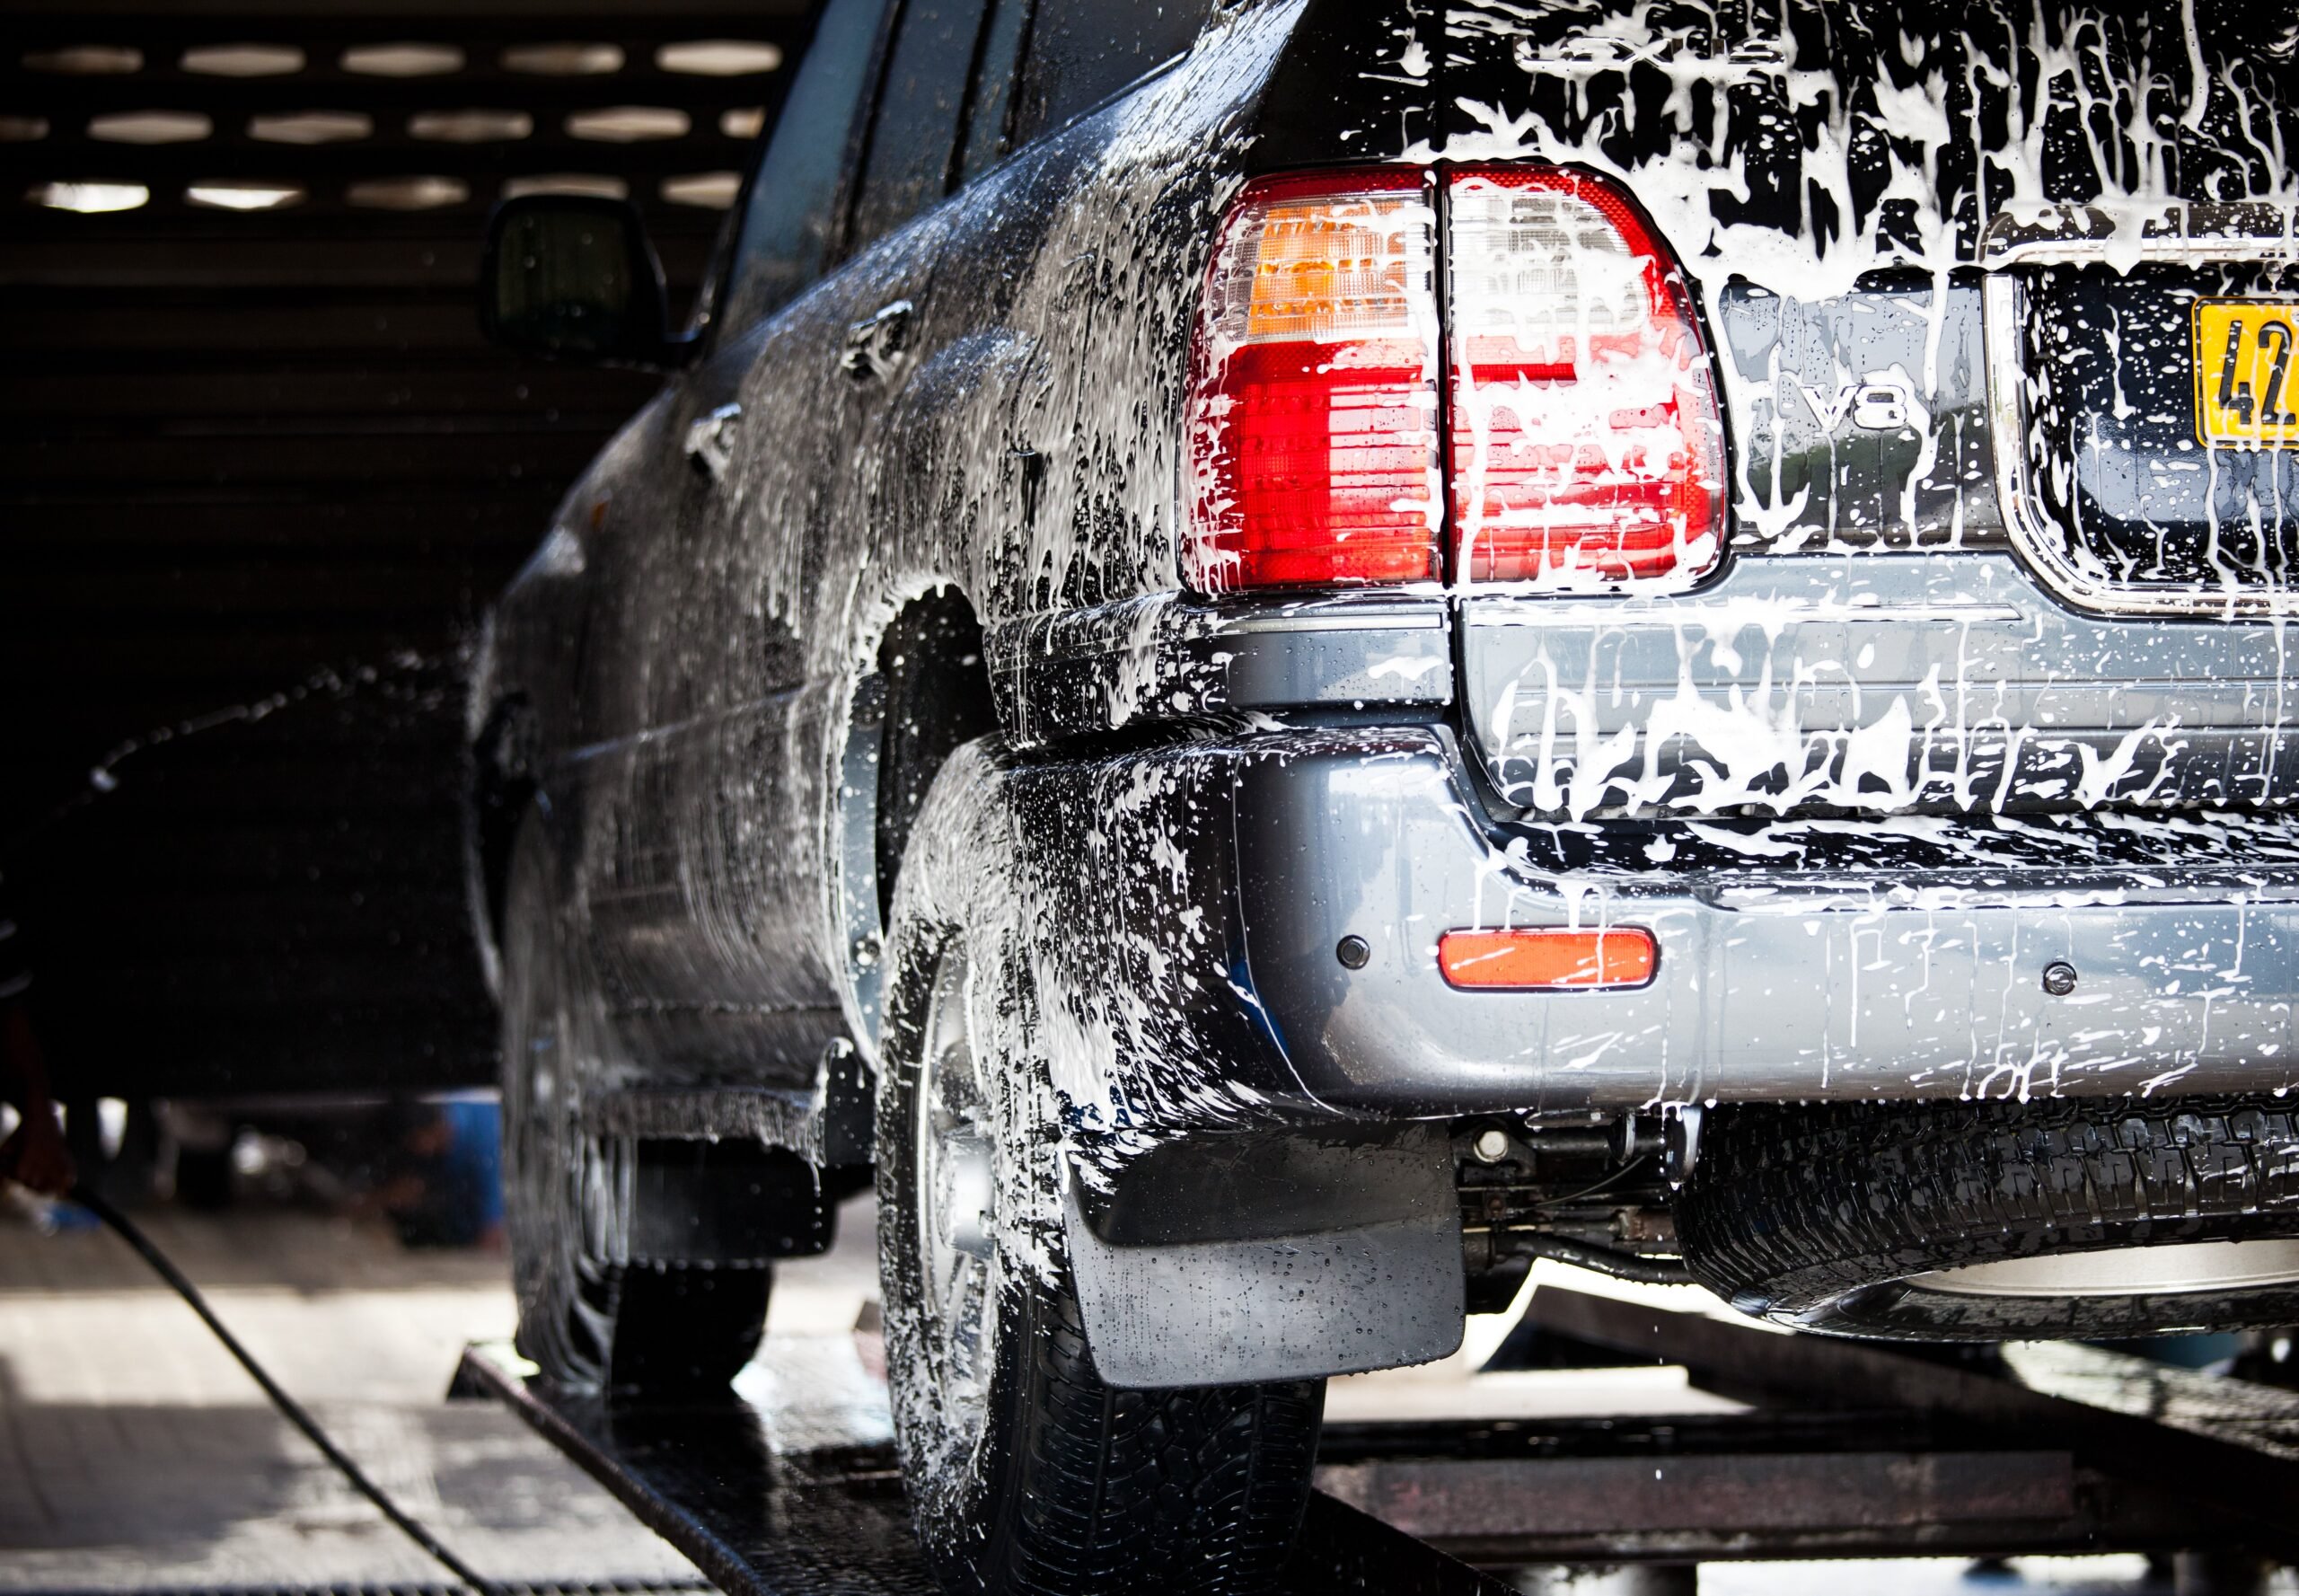 What You Need To Know About The NYC Car Wash License & Bond